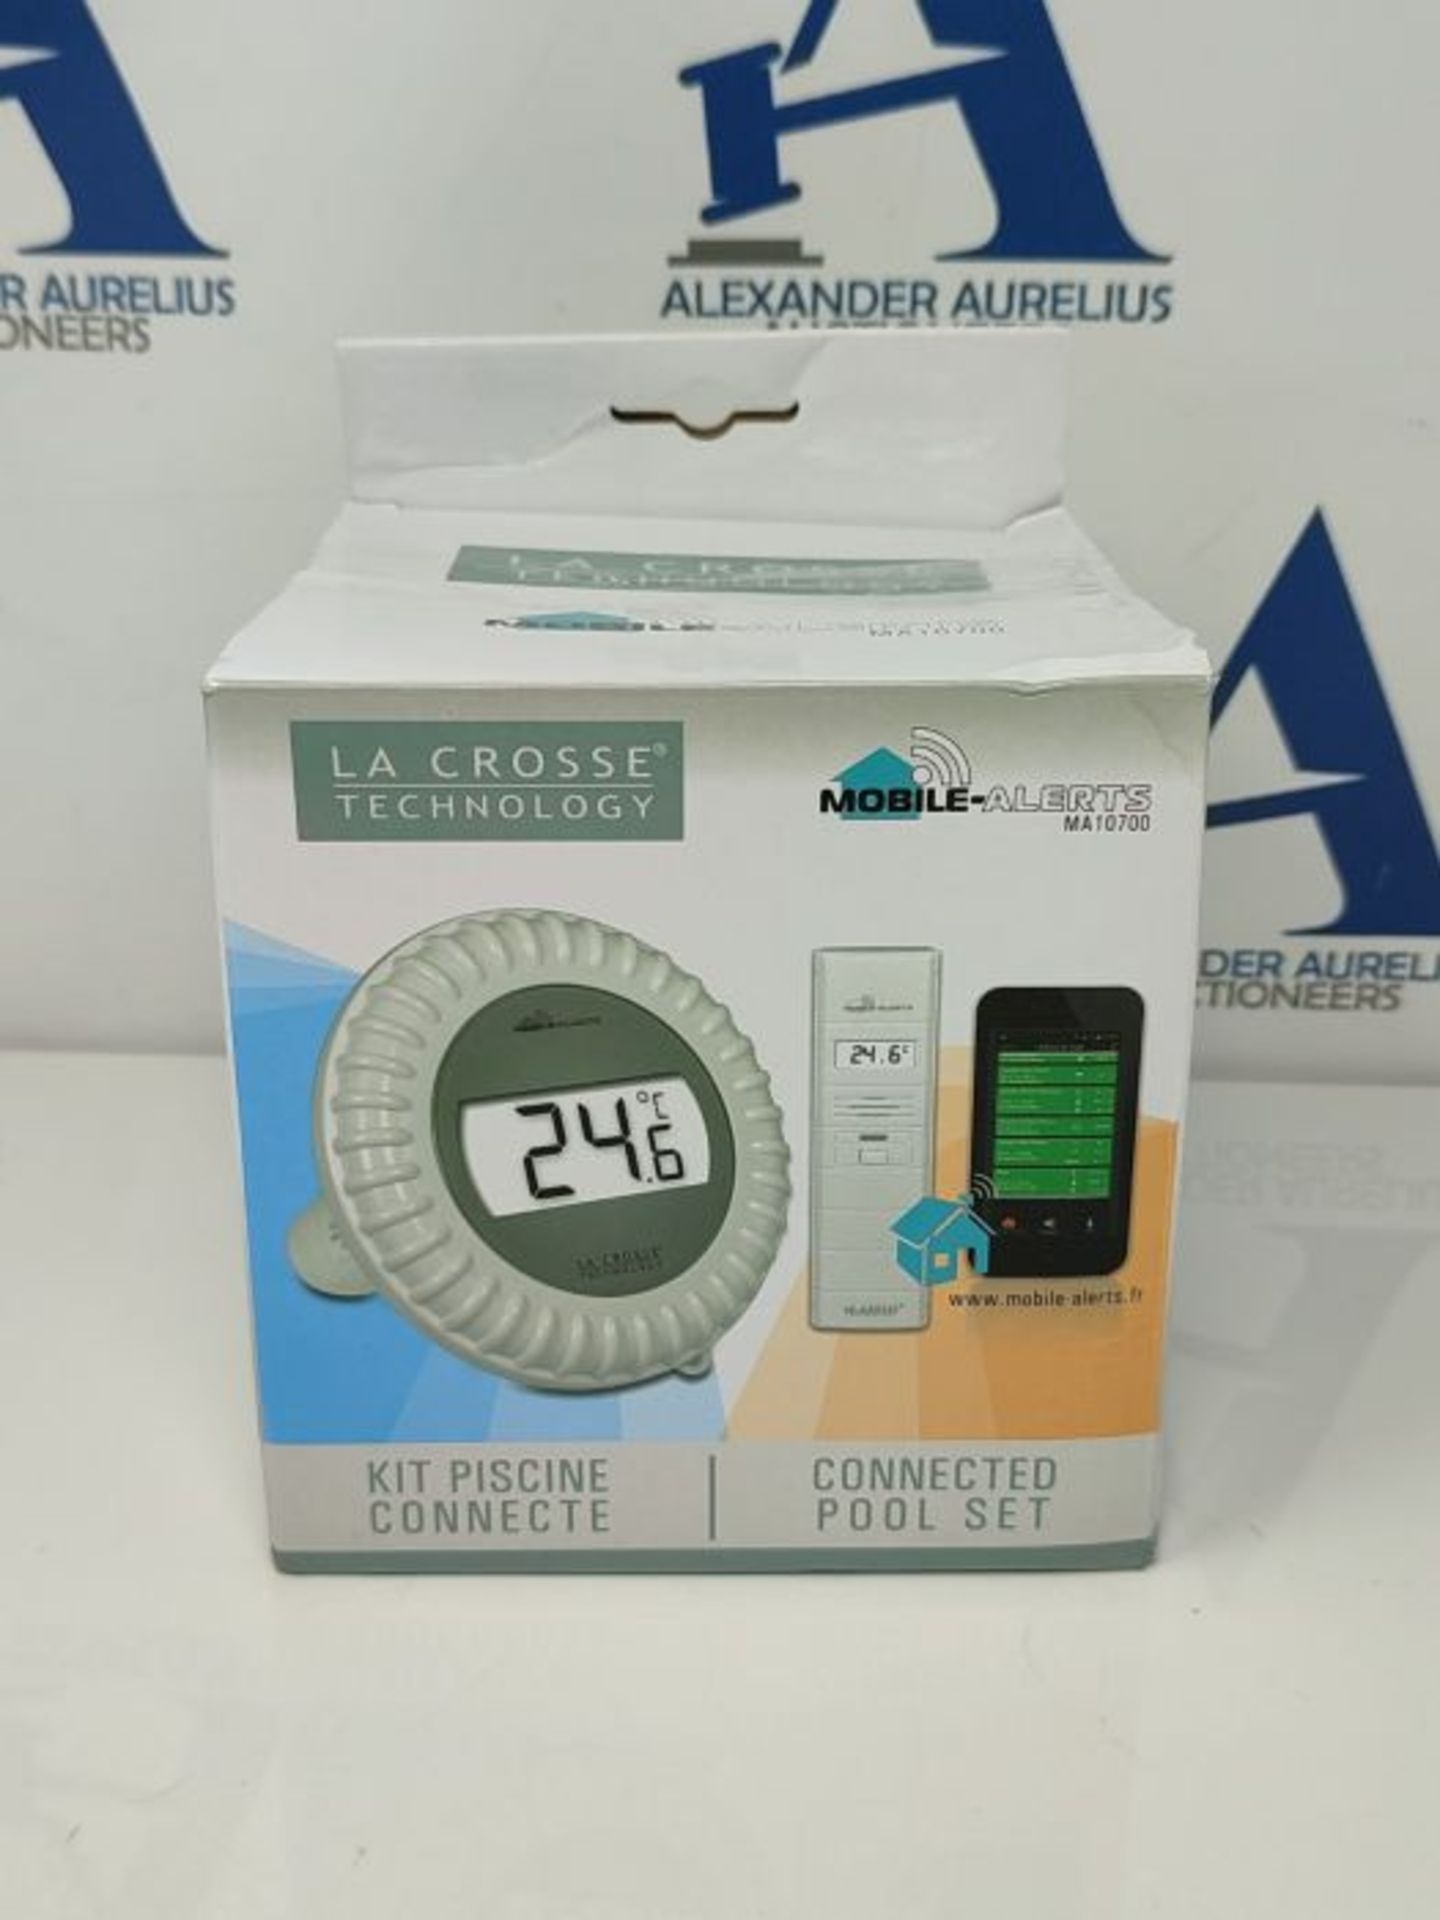 La Crosse Technology - MA10700 Mobile Alerts Connected Pool Kit containing a pool temp - Image 2 of 3